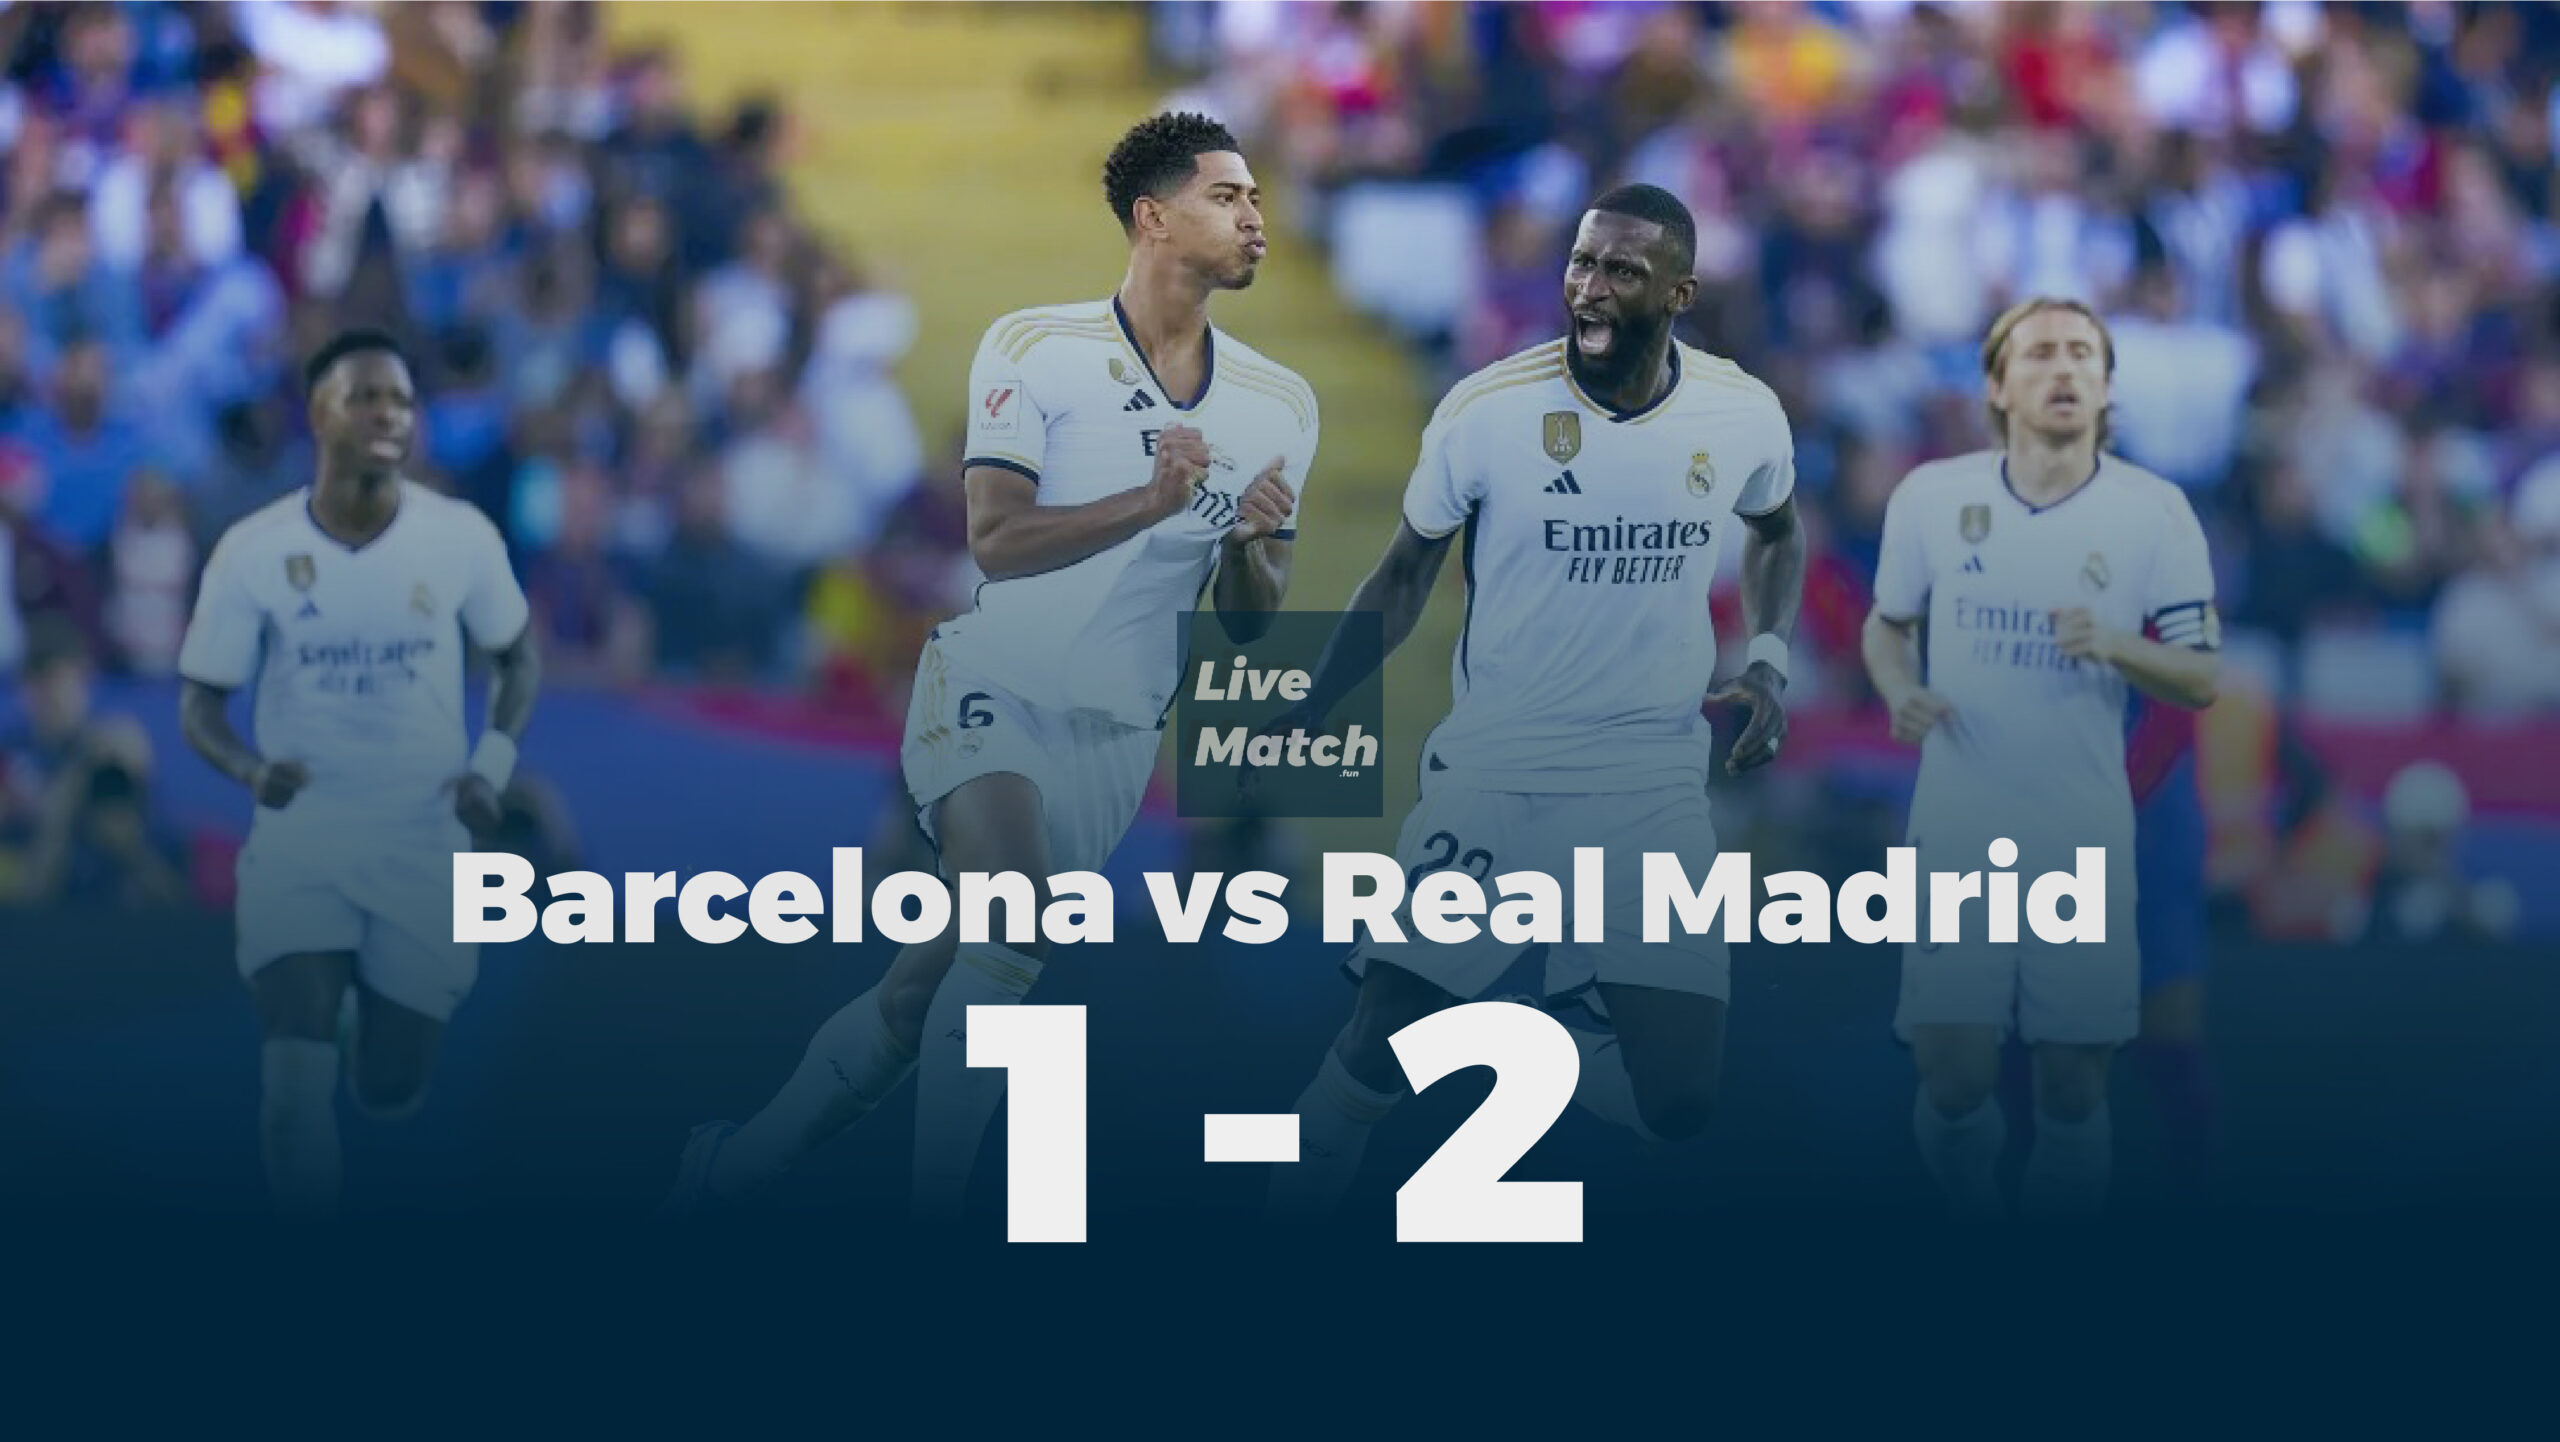 Barcelona 1-2 Real Madrid: Jude Bellingham secures the El Clasico victory with two goals.